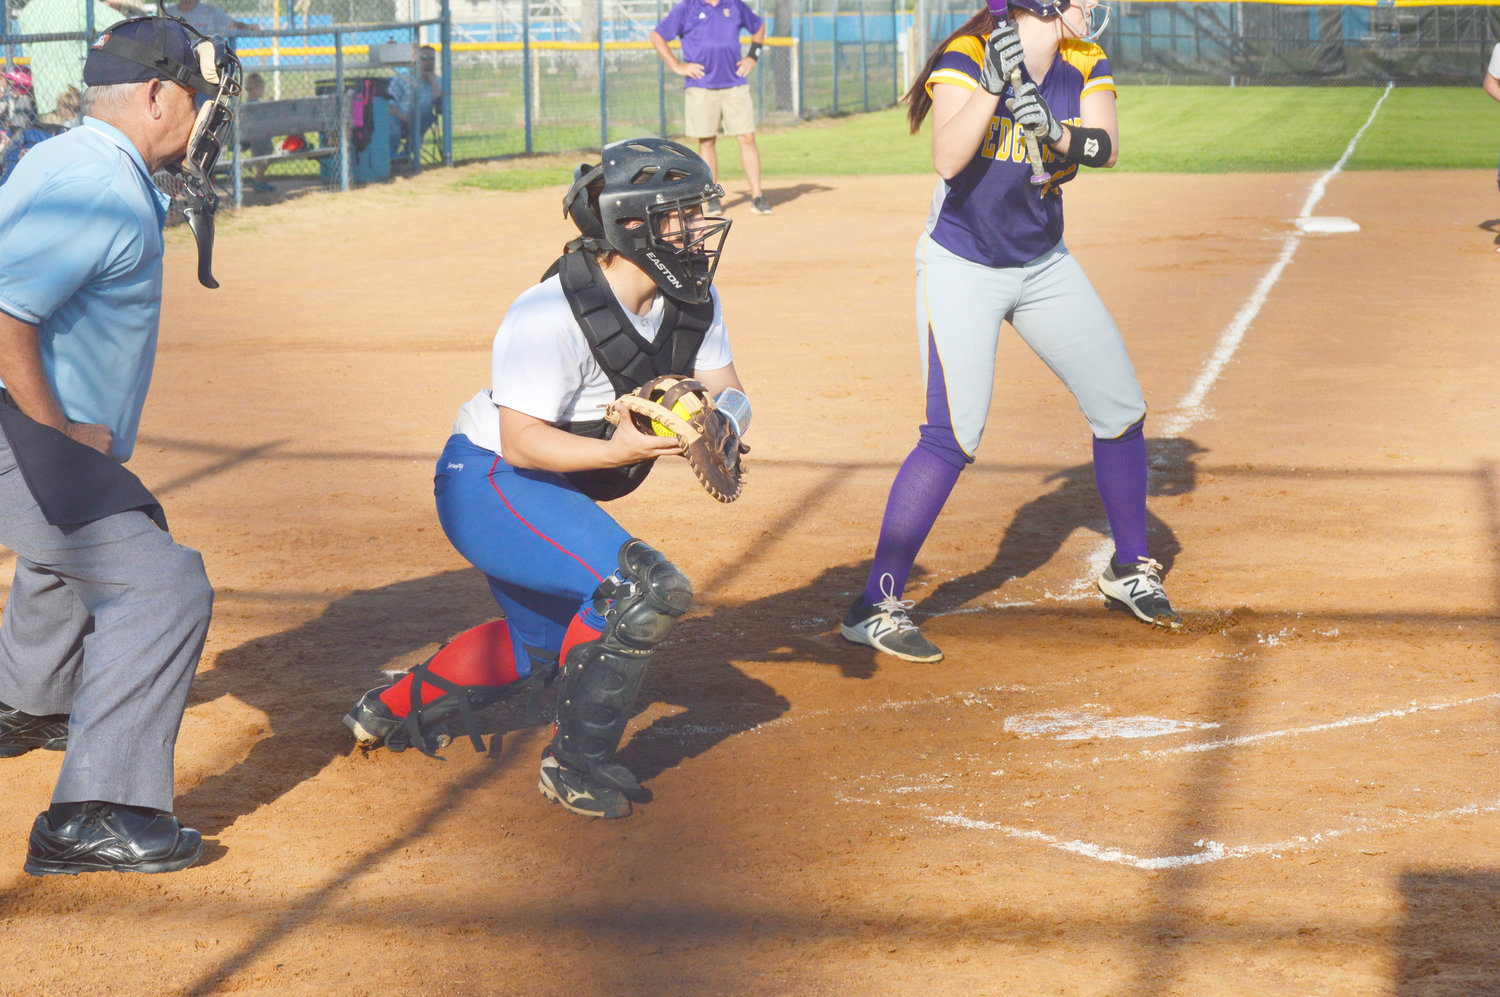 Quitman’s Shayla Smith gets ready to fire a throw to first base in a pick-off attempt against Edgewood. The Lady Bulldogs finished their season with wins over Eustace and Edgewood last week.